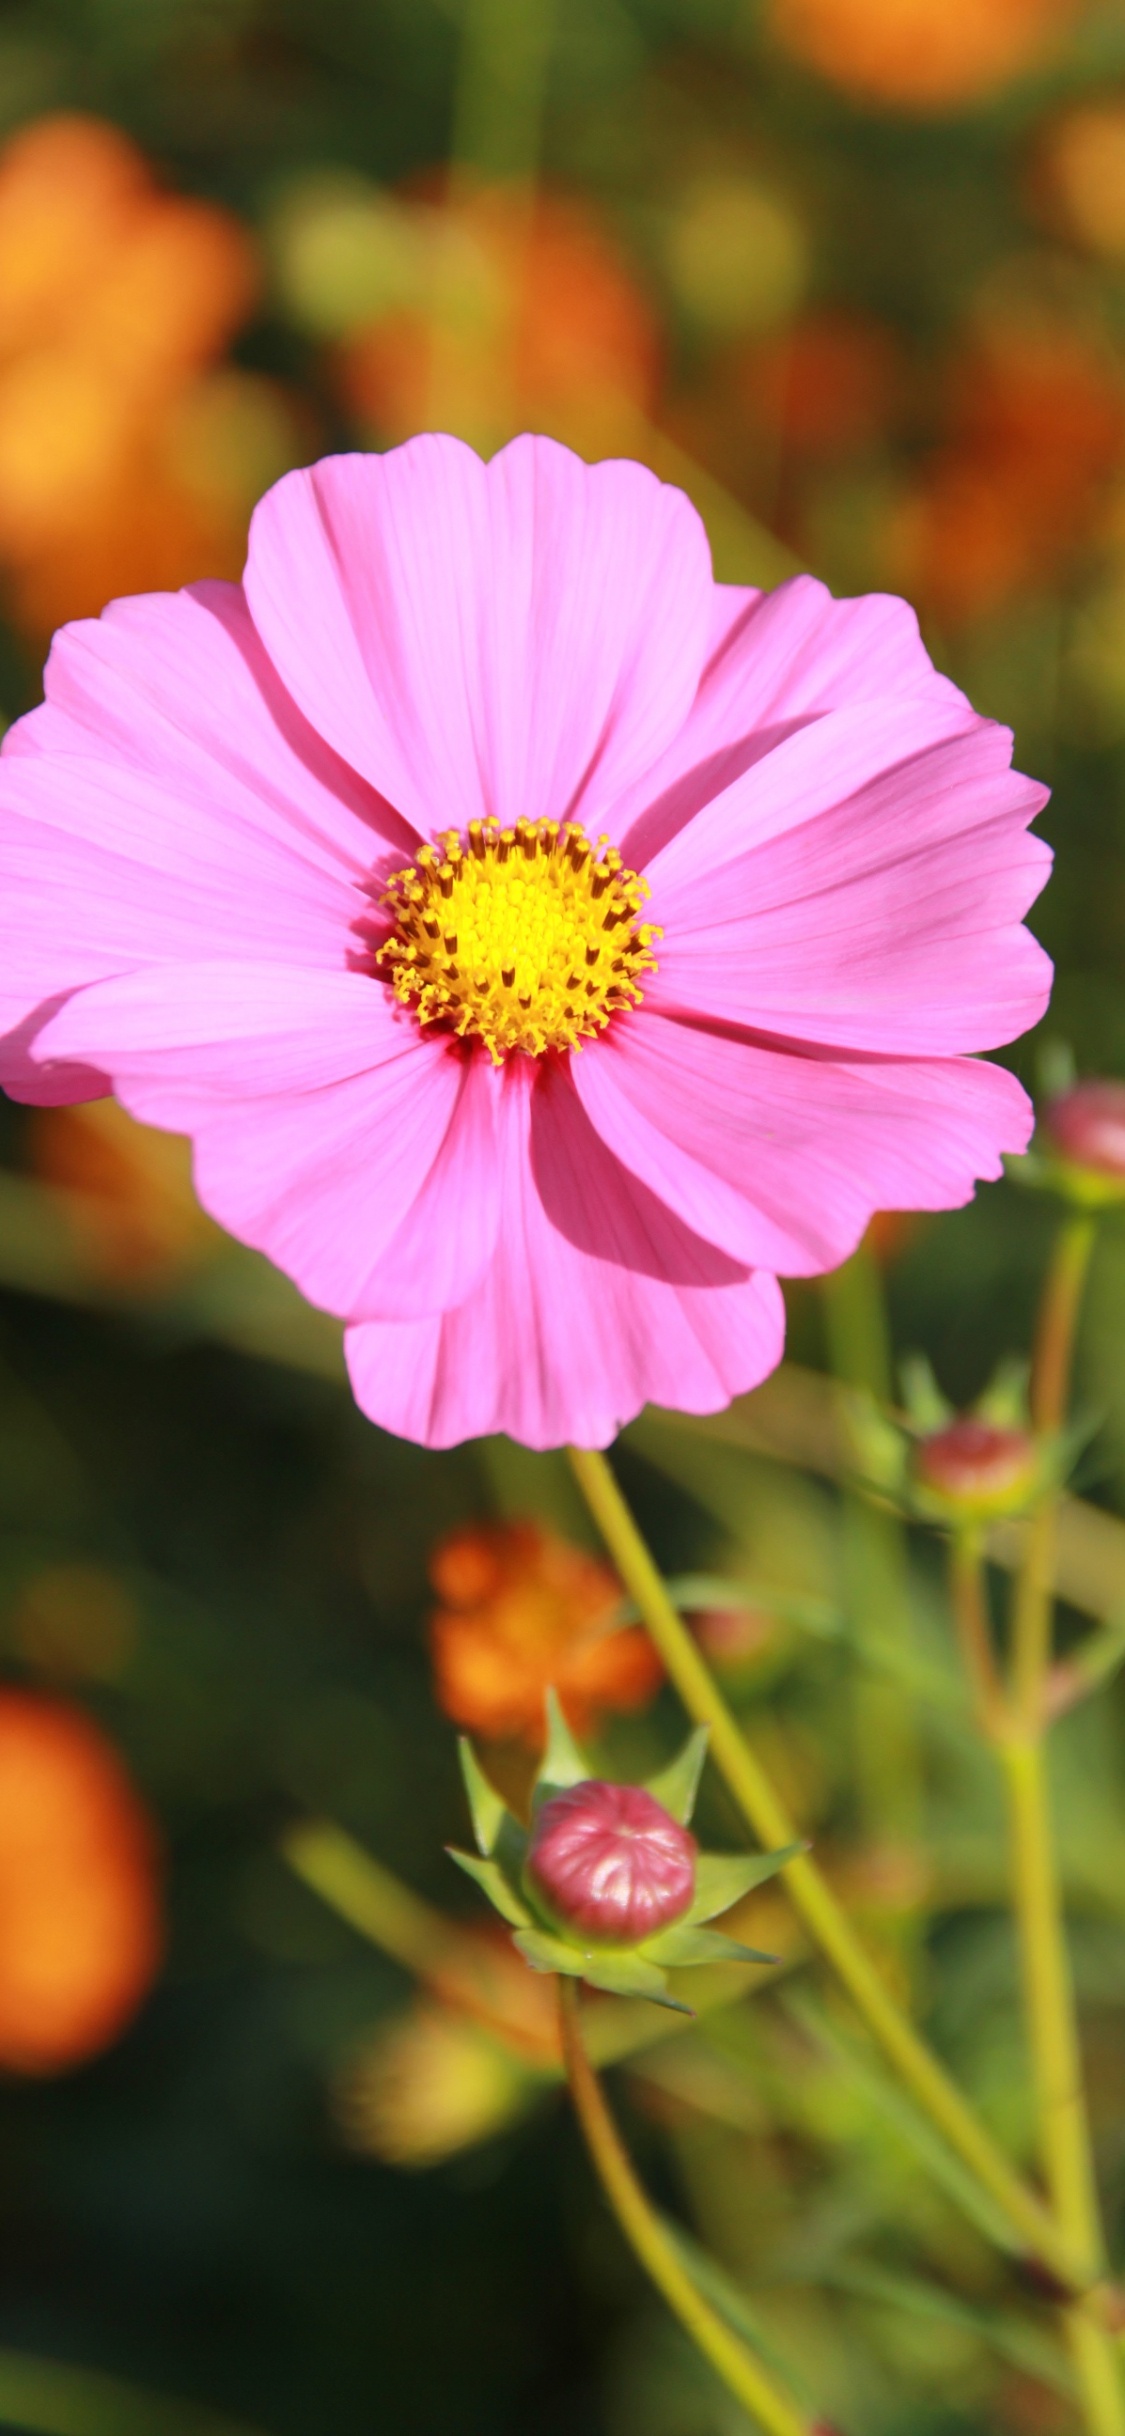 Pink Cosmos Flower in Bloom During Daytime. Wallpaper in 1125x2436 Resolution